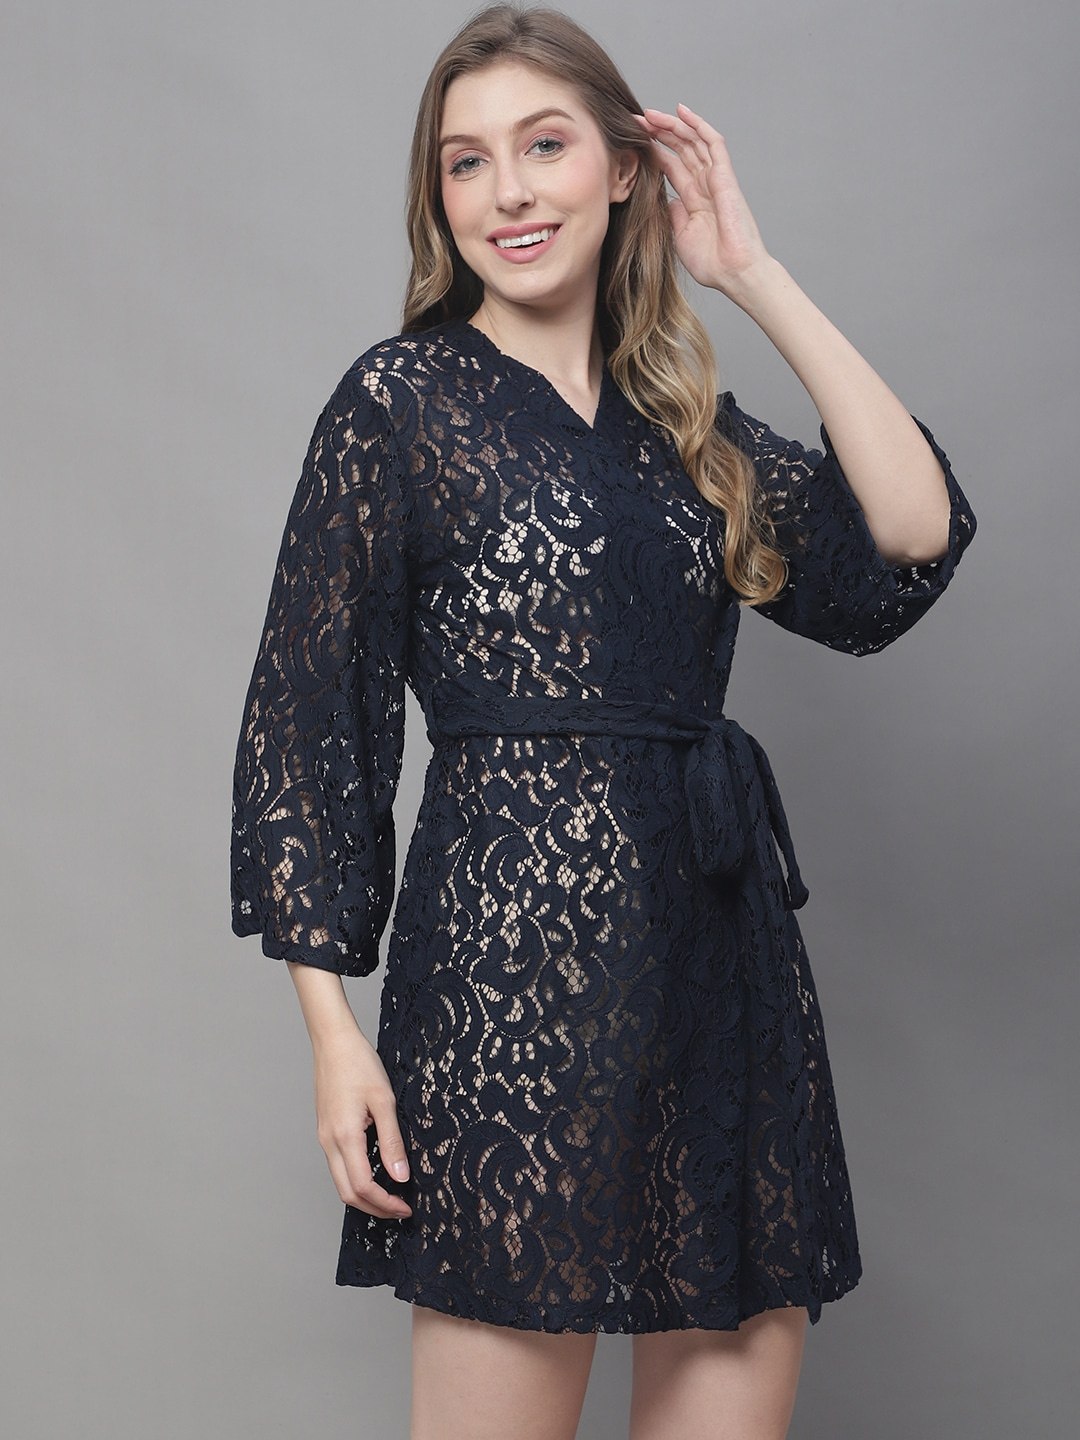 Navy Net Lace Solid Printed Cotton Cover up Robe Claura Designs Pvt. Ltd. Nighty Cotton, Kaftan_allsizes, Navy Blue, net lace, Nightdress, Robe, Sleepwear, Solid Printed, Women